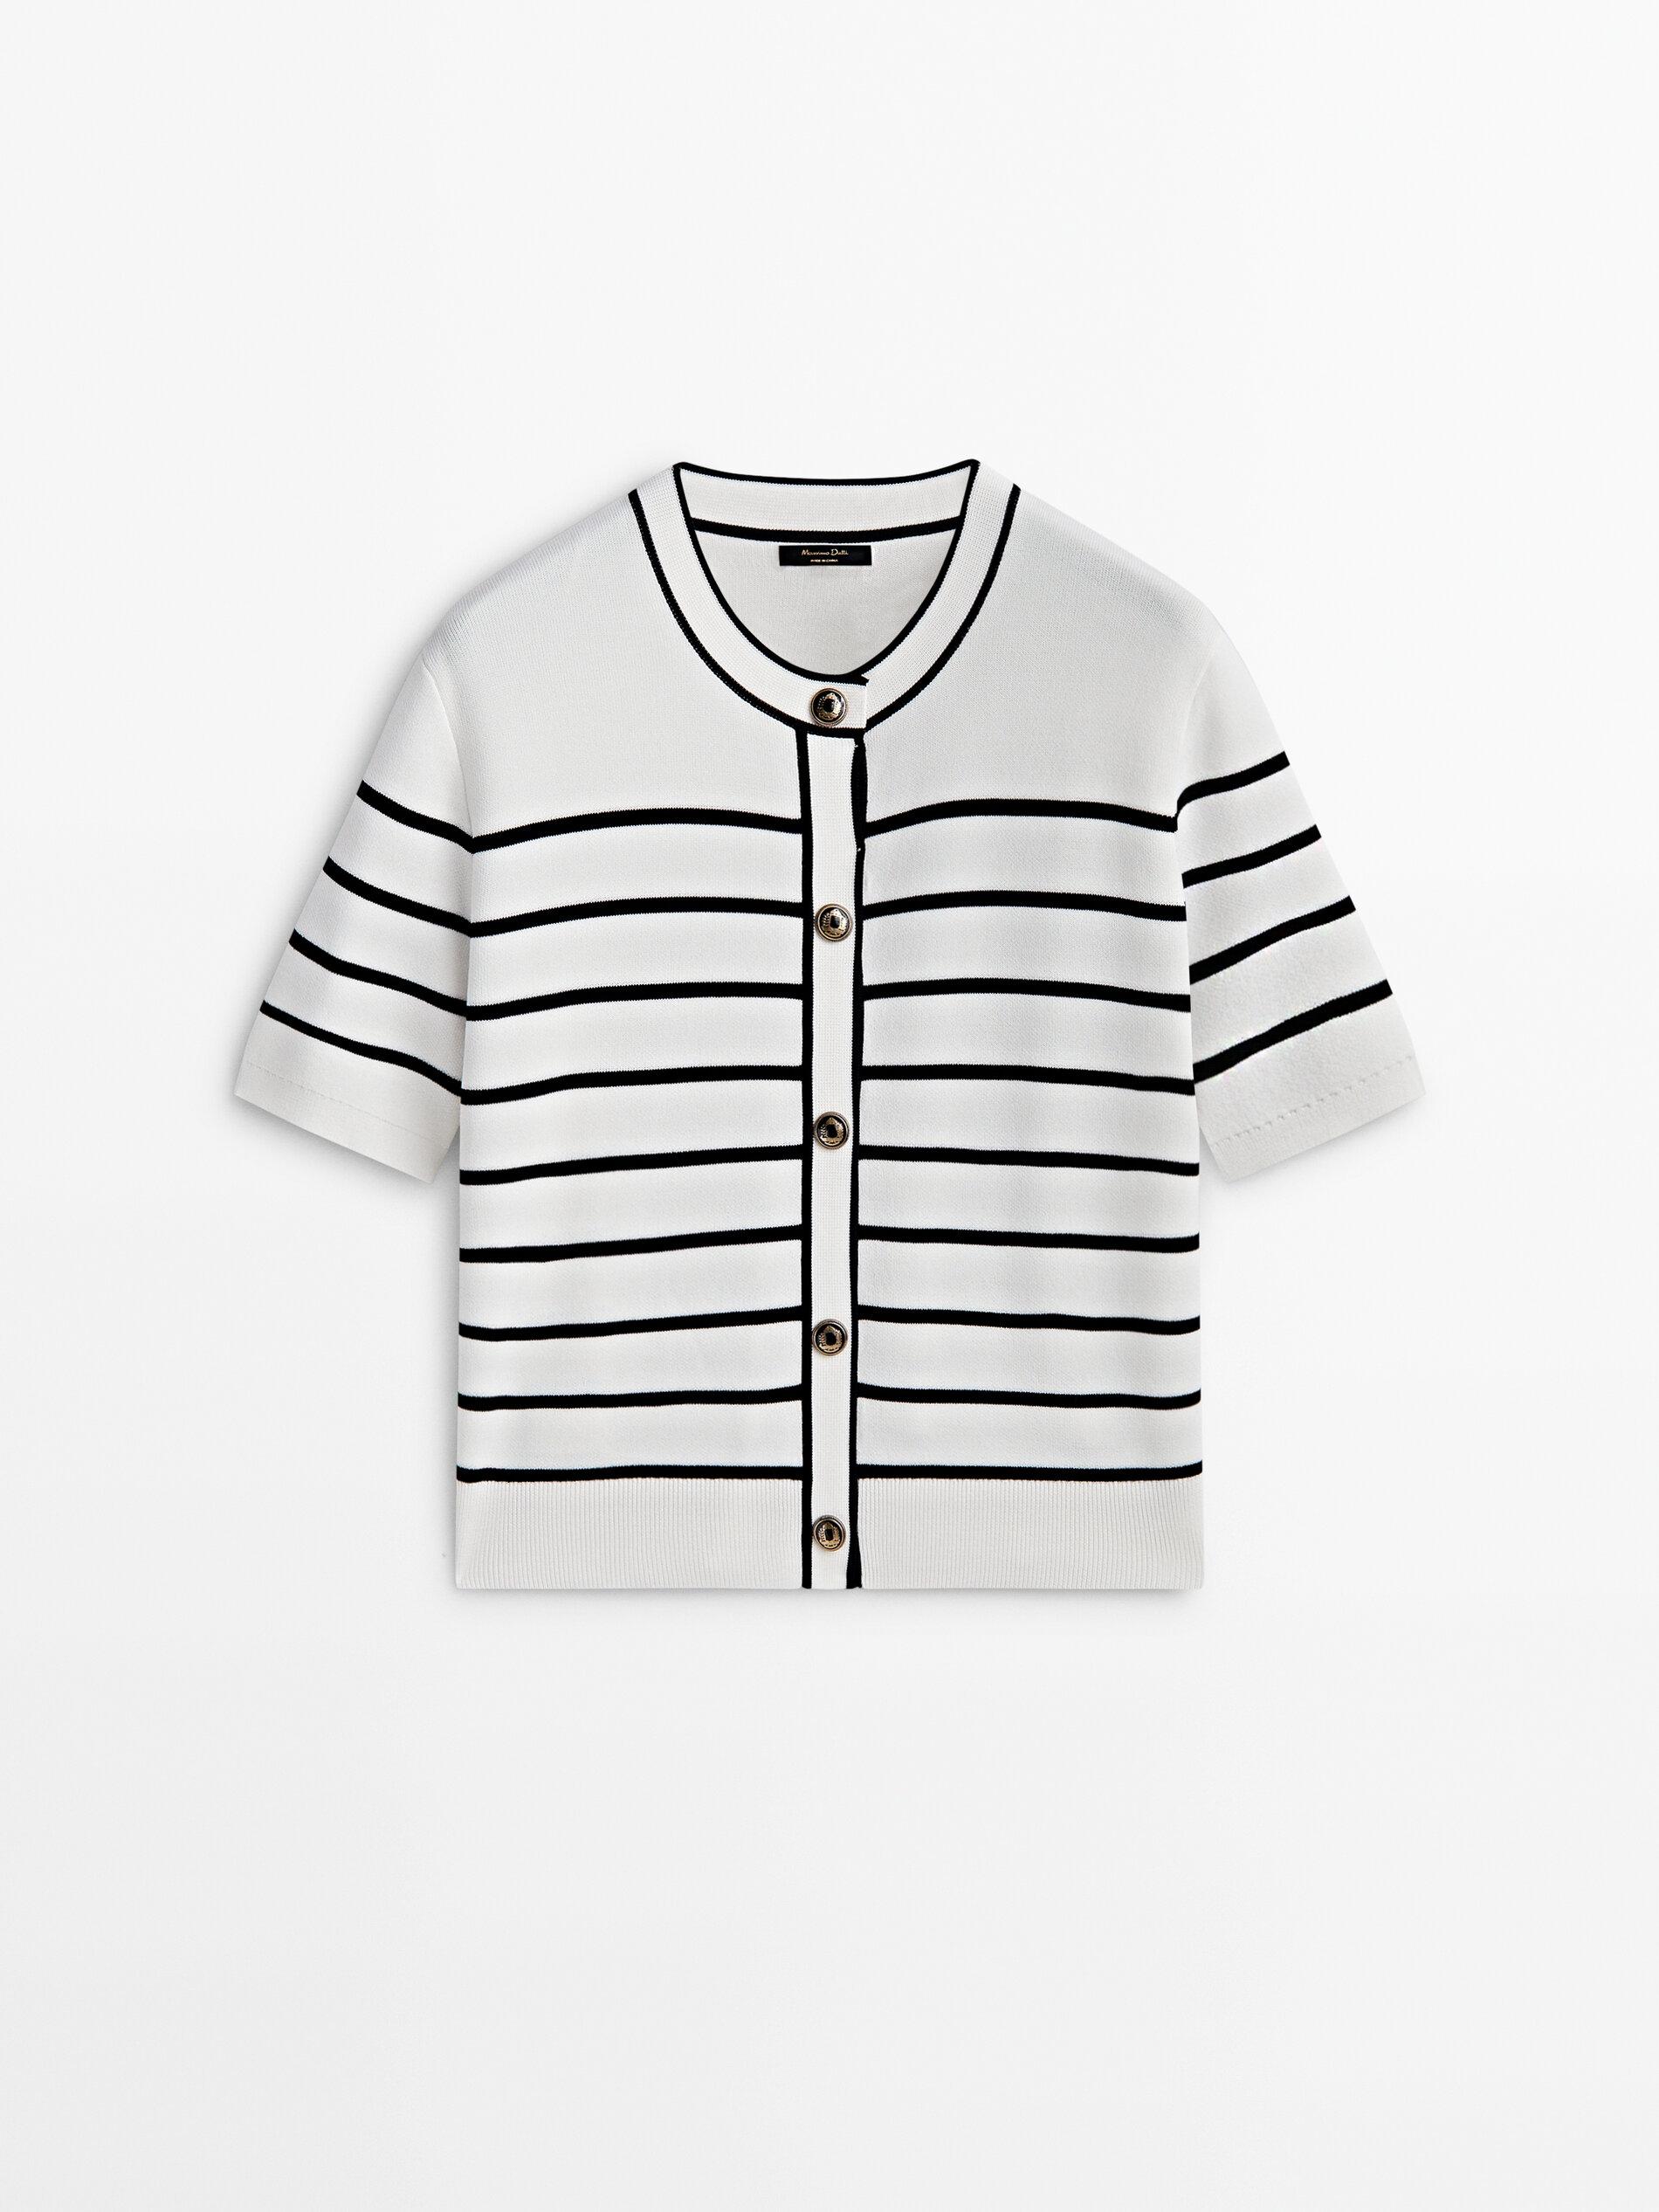 MASSIMO DUTTI Striped Short Sleeve Knit Cardigan in White | Lyst